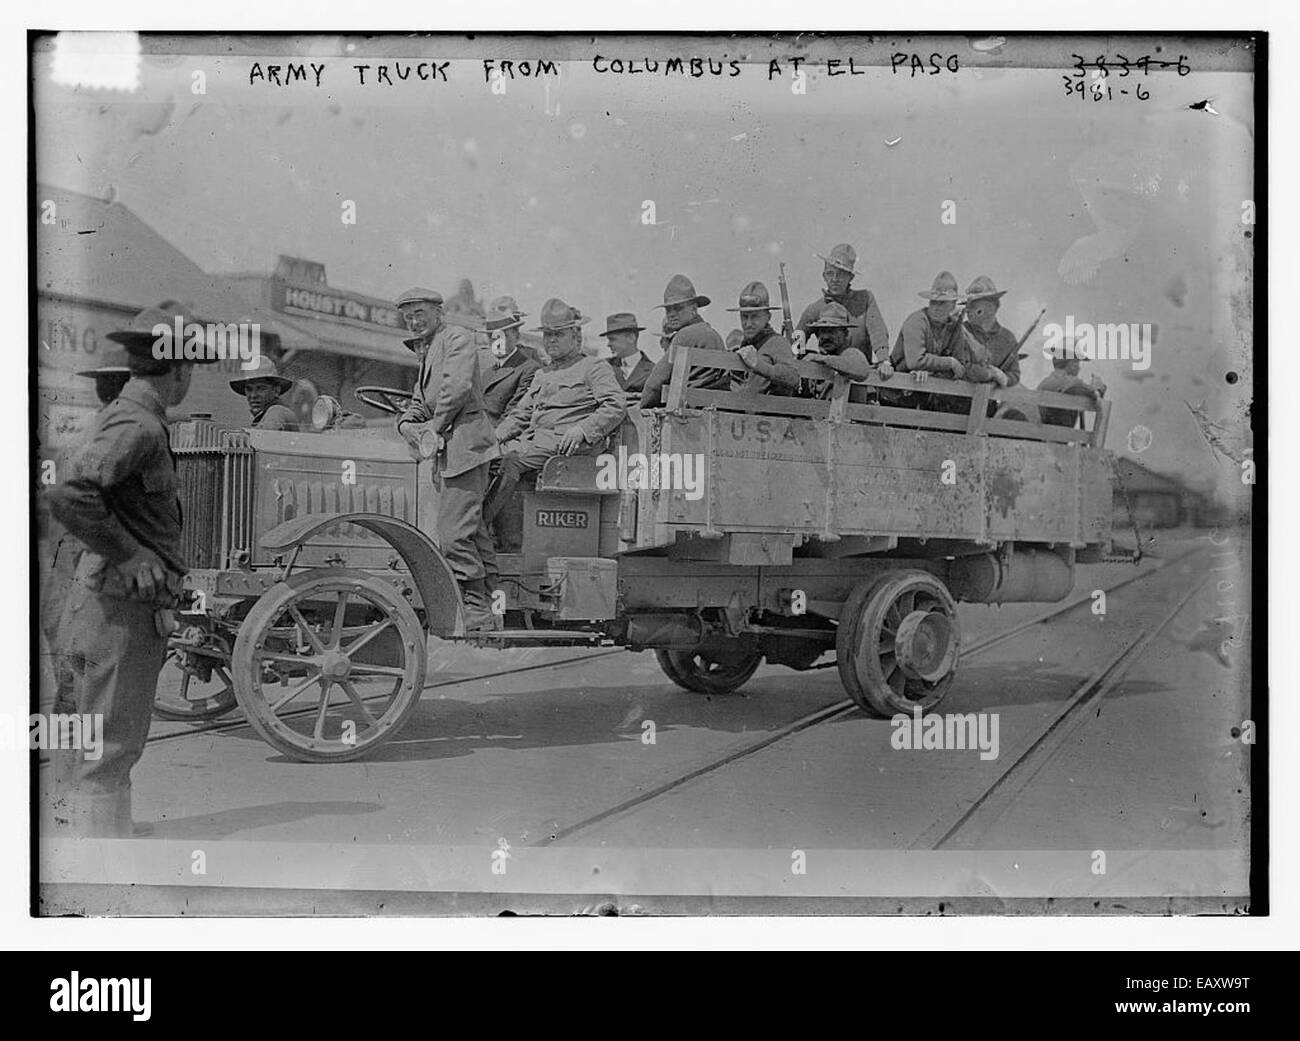 Army truck Black and White Stock Photos & Images - Alamy